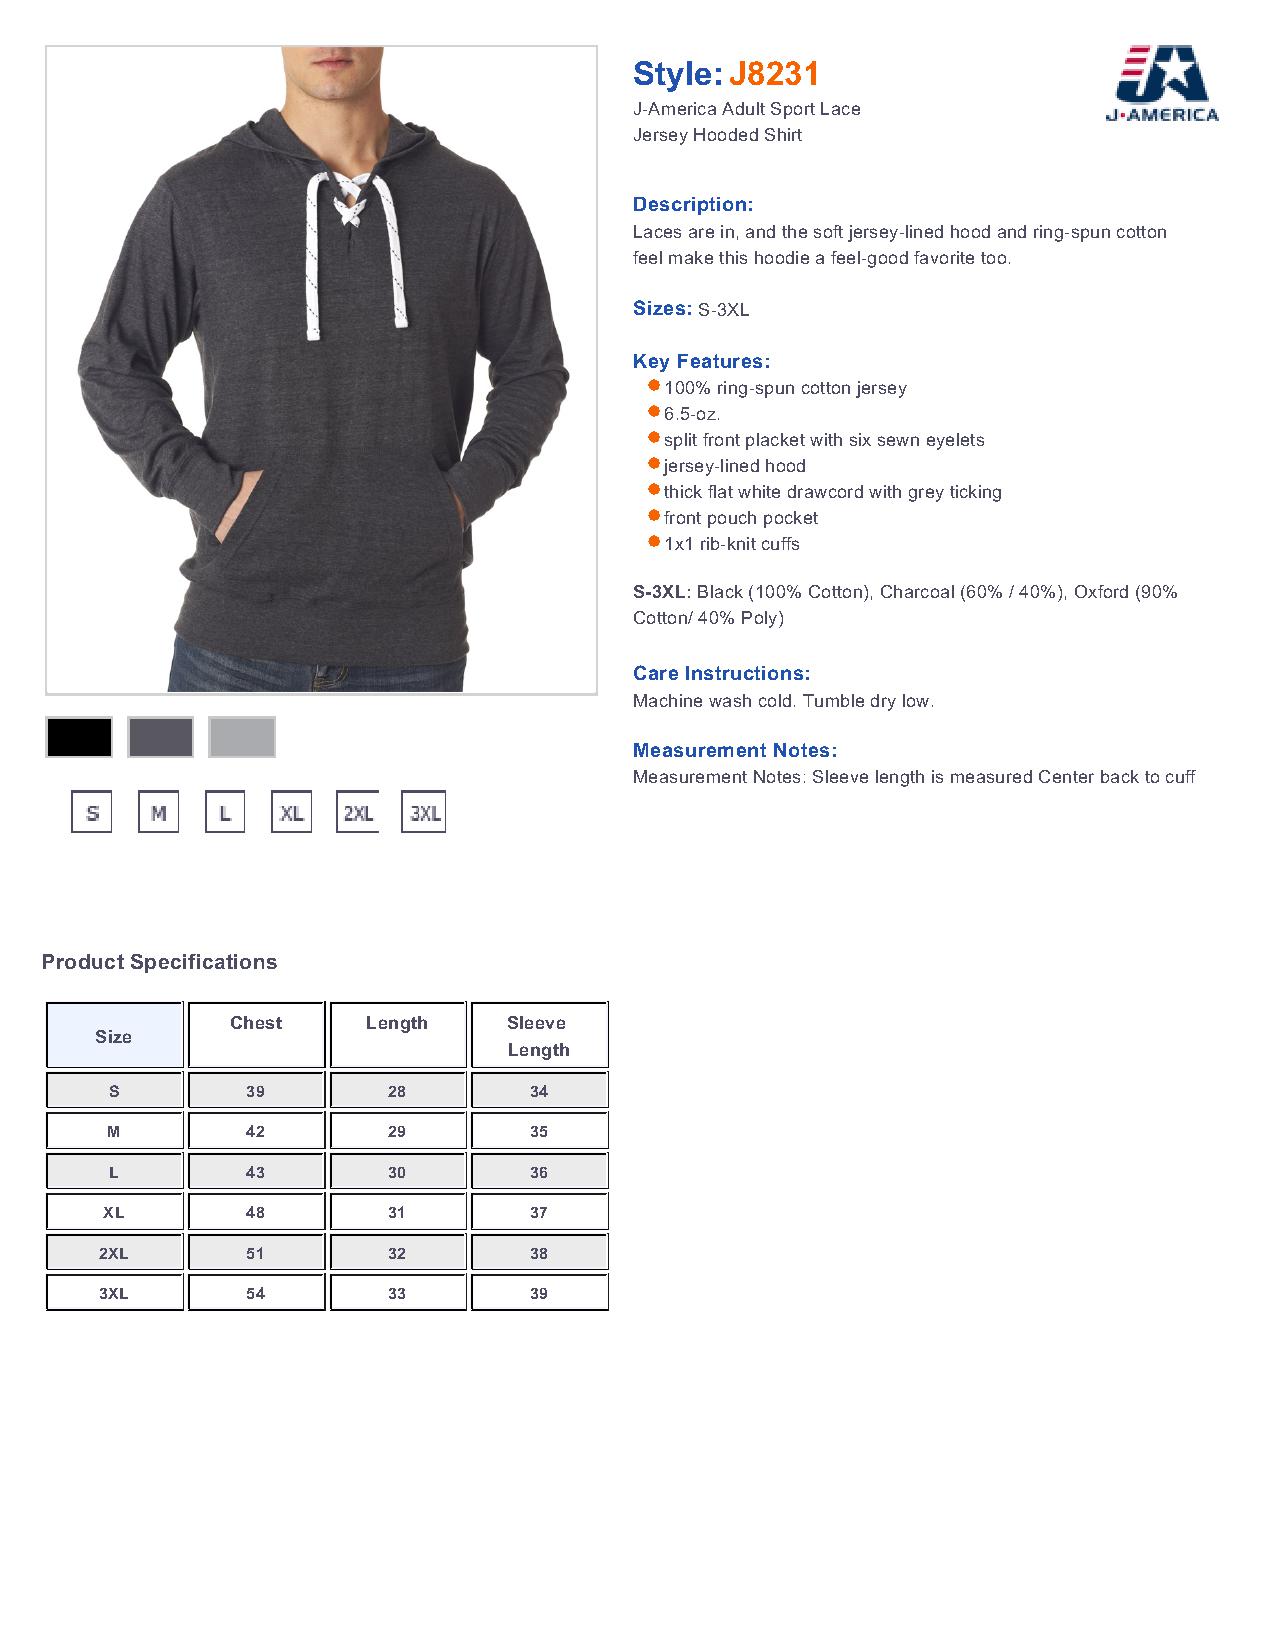 J-America J8231 - Adult Sport Lace Jersey Hooded Tee $15.12 - T-Shirts